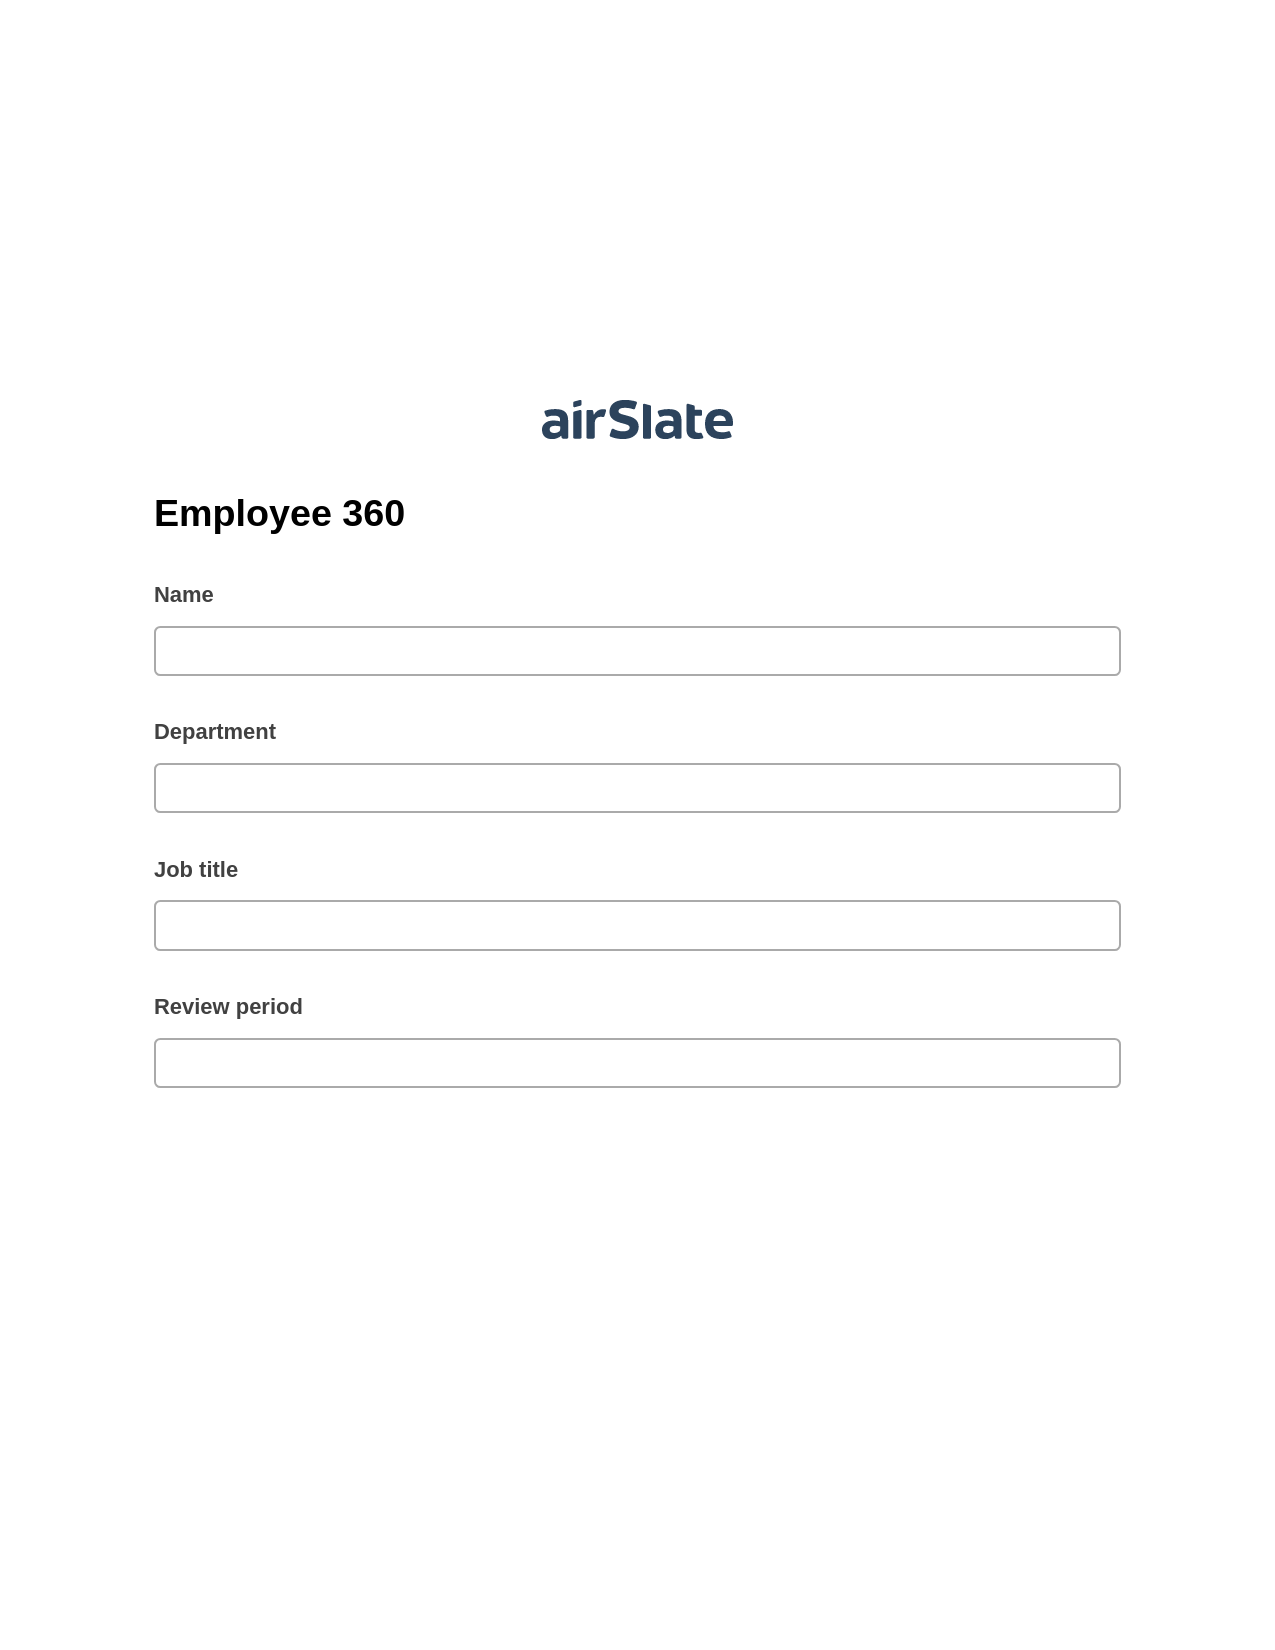 Employee 360 Pre-fill Document Bot, Export to MS Dynamics 365 Bot, Export to Excel 365 Bot